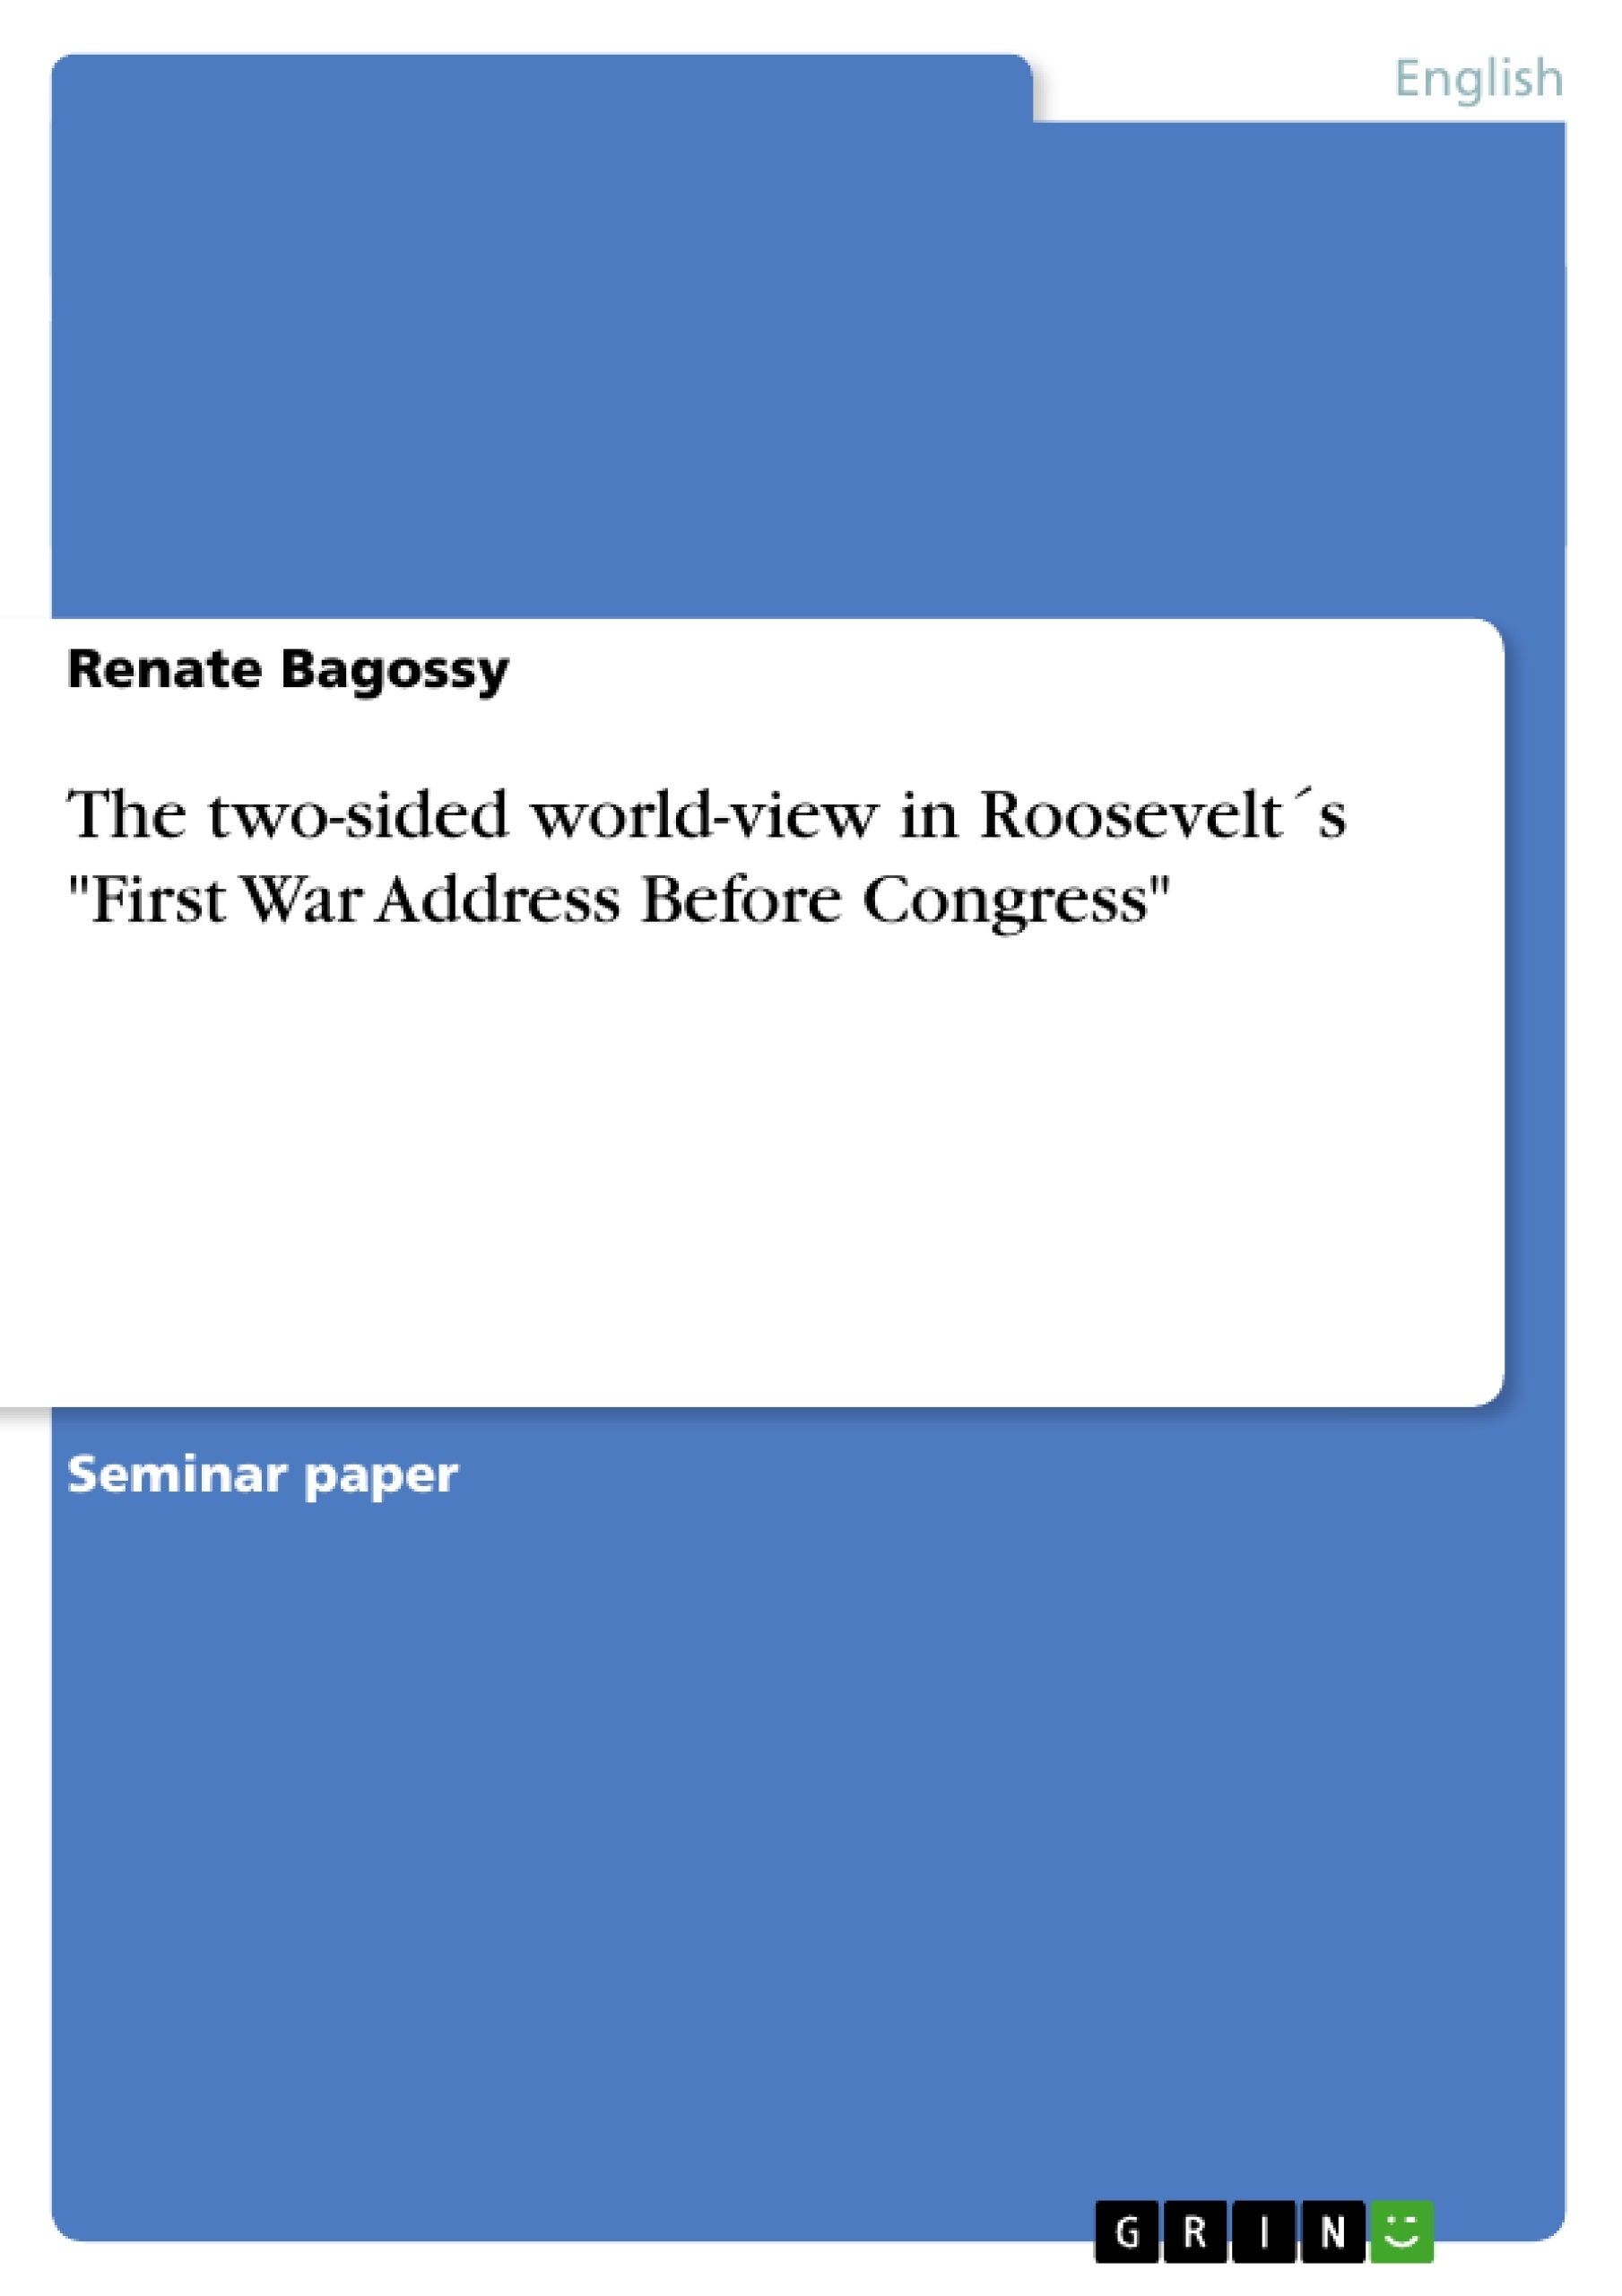 Title: The two-sided world-view in Roosevelt´s "First War Address Before Congress"